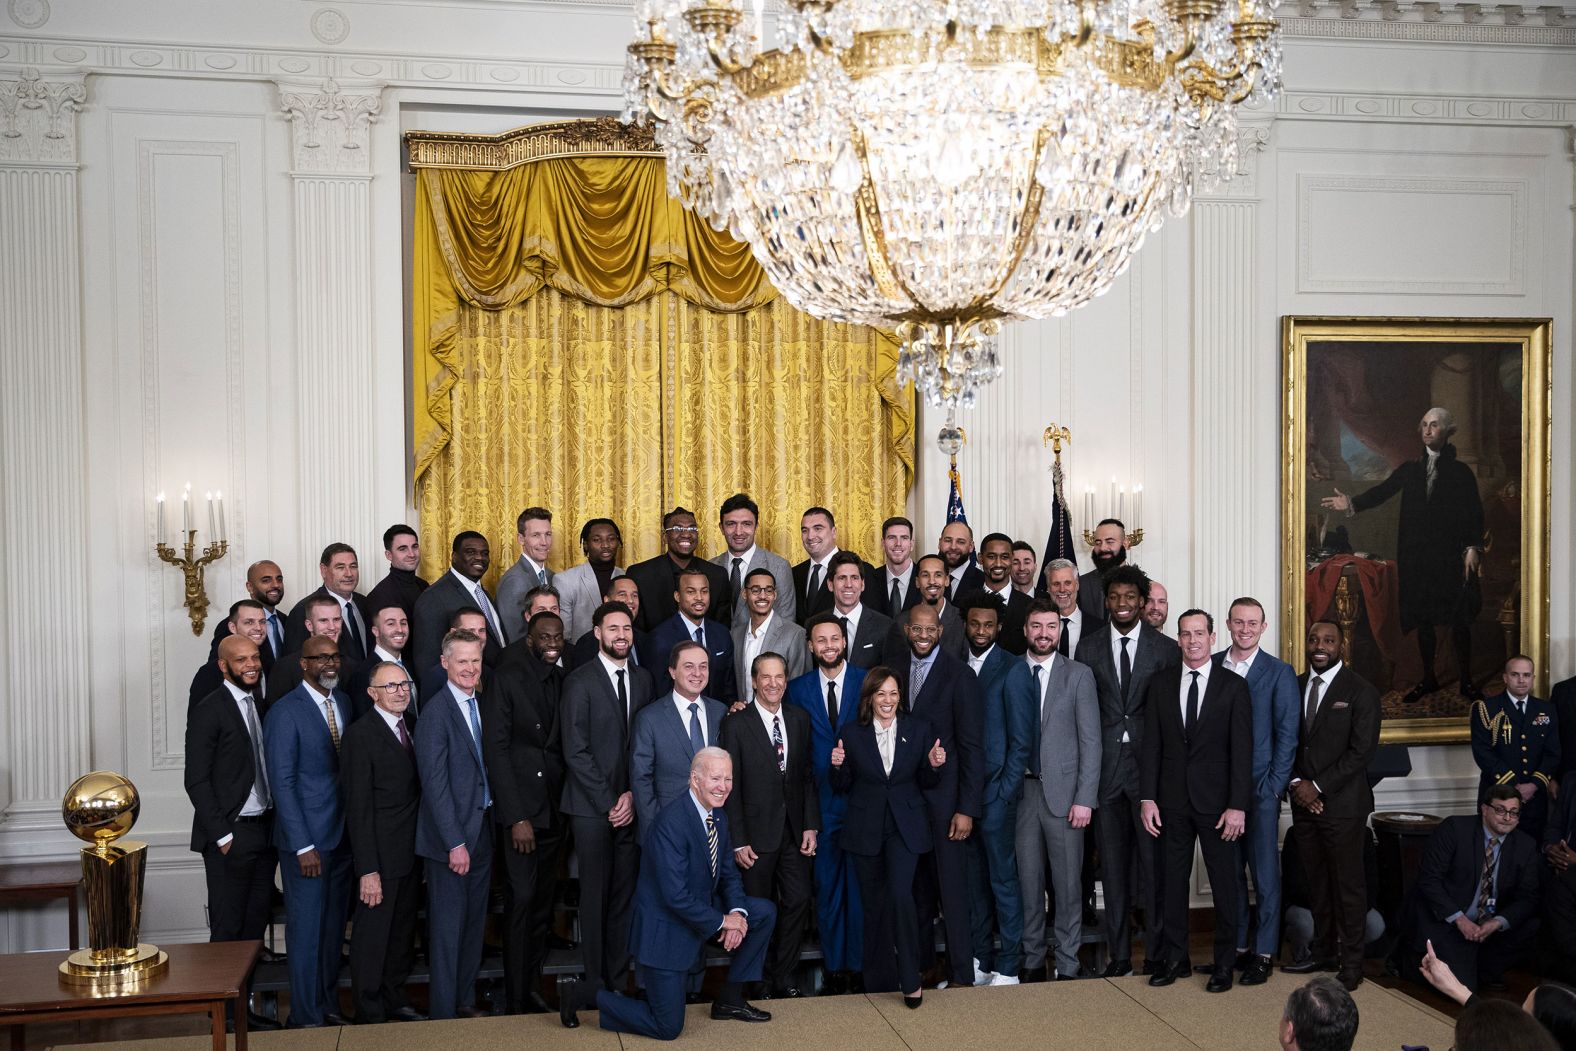 US President Joe Biden and Vice President Kamala Harris pose for a group photo with members of the Golden State Warriors basketball franchise in the East Room of the White House on Tuesday, January 17. Biden and Harris were honoring the team's 2022 NBA title.